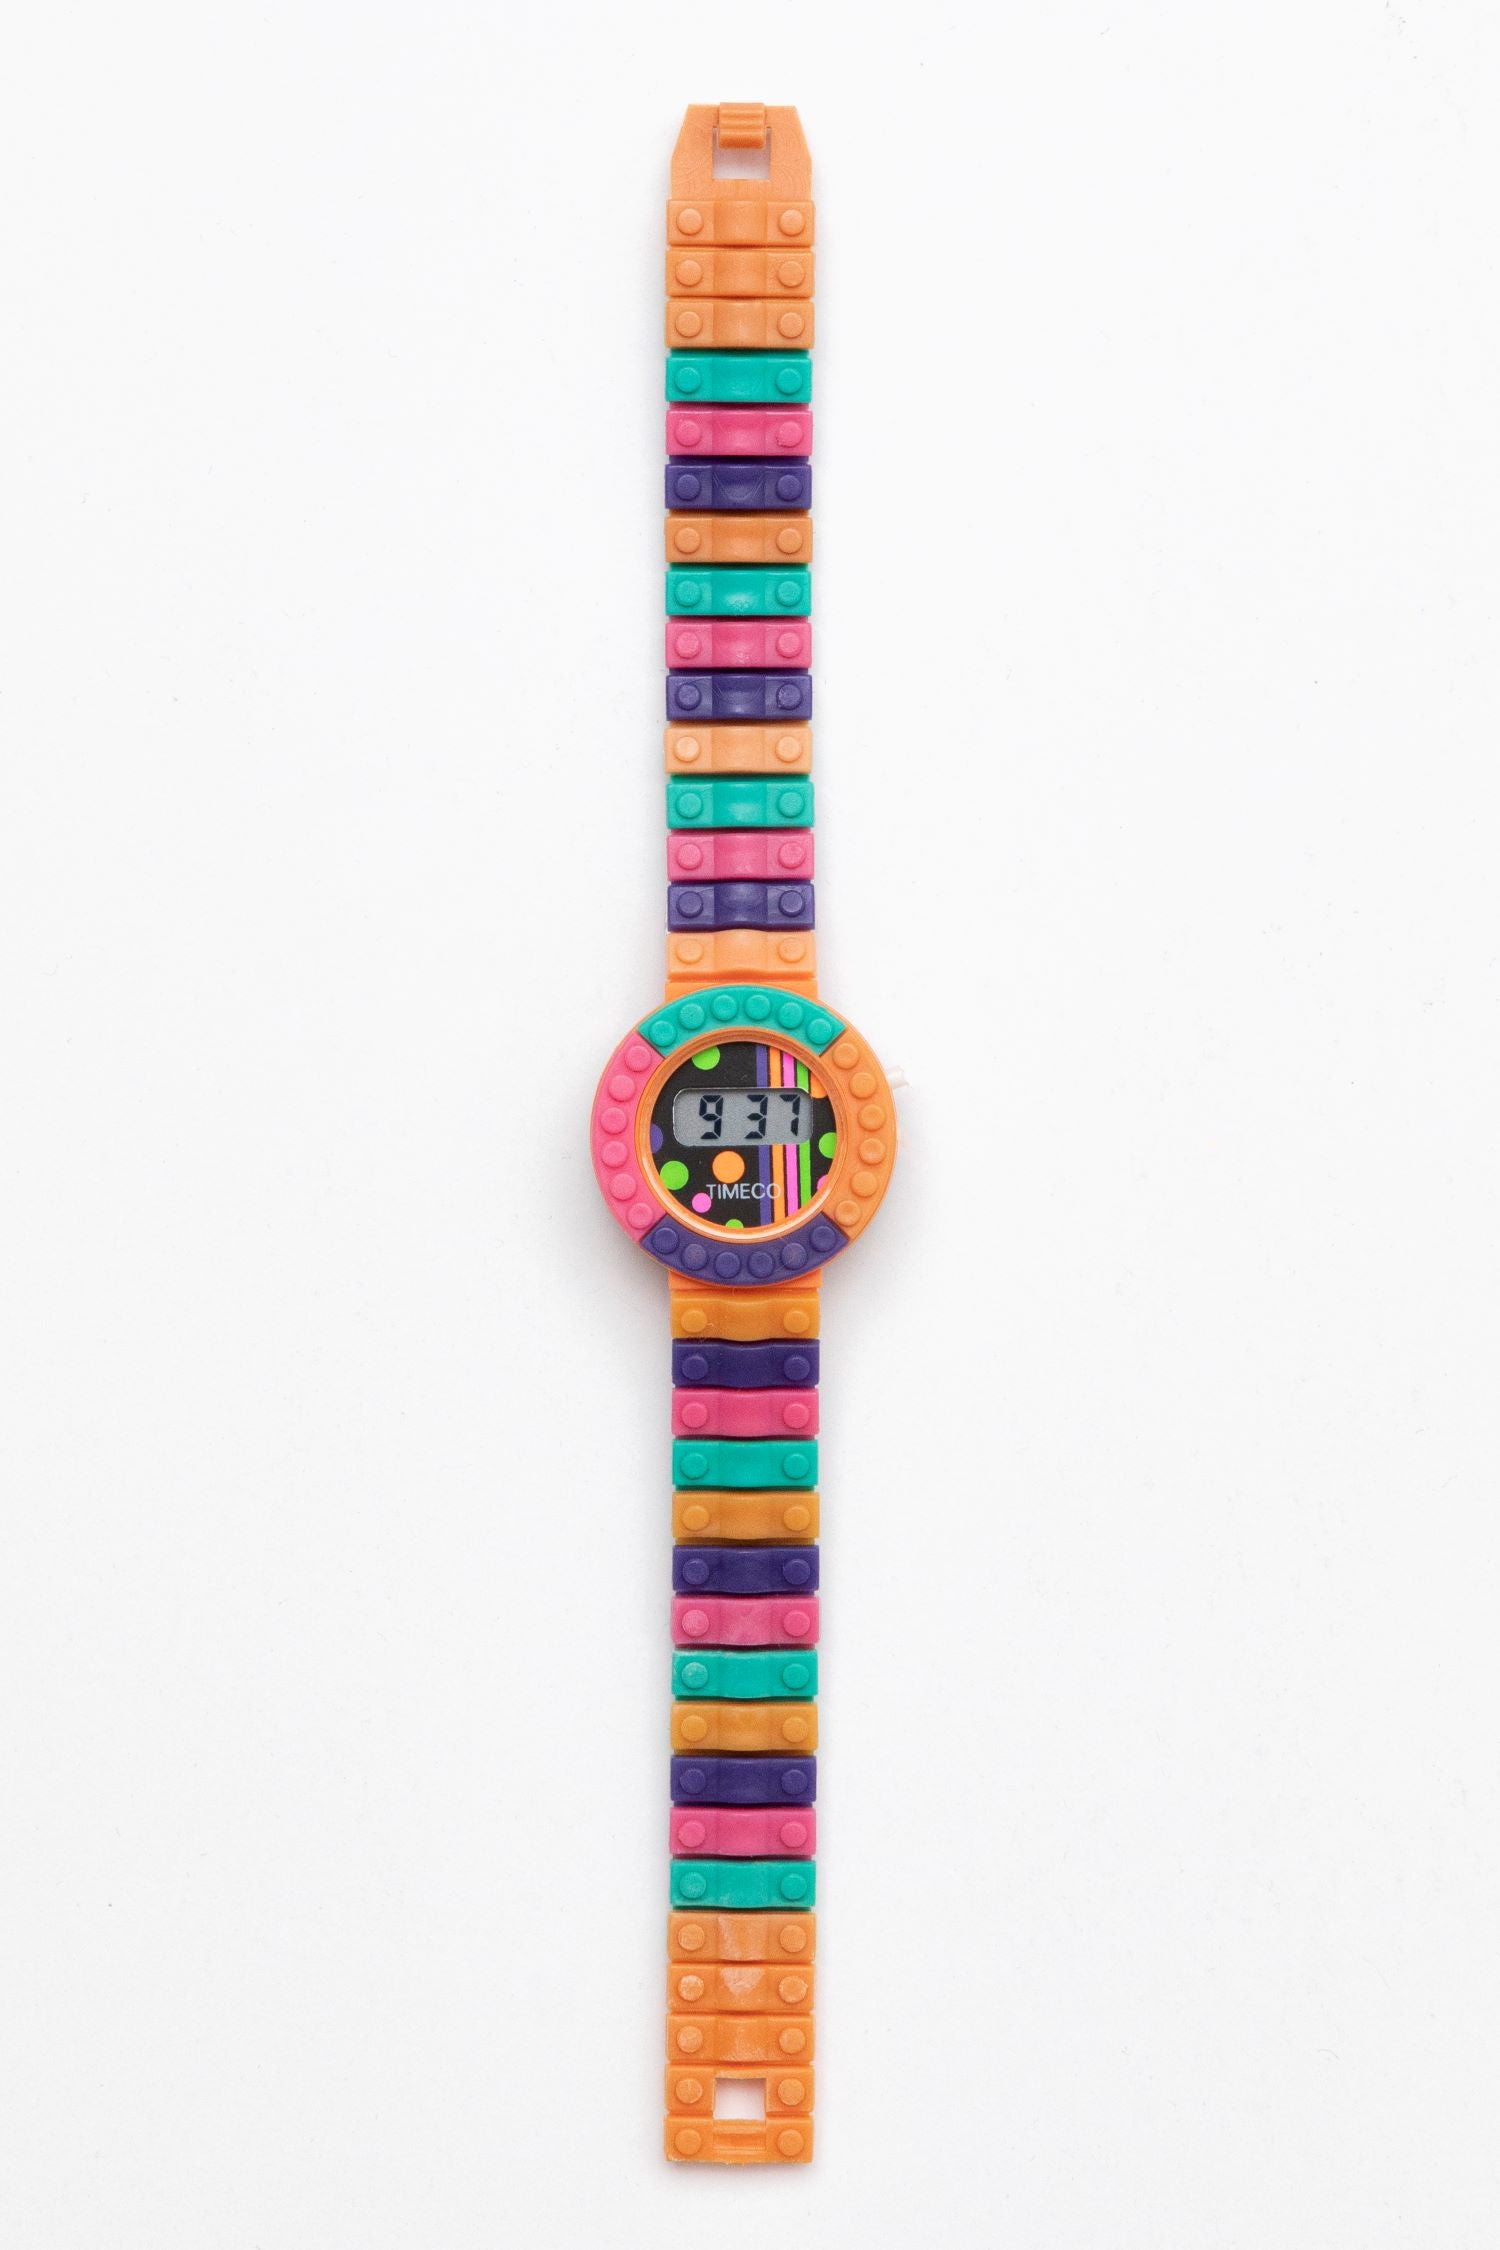 Women's Watches - Ridiculous